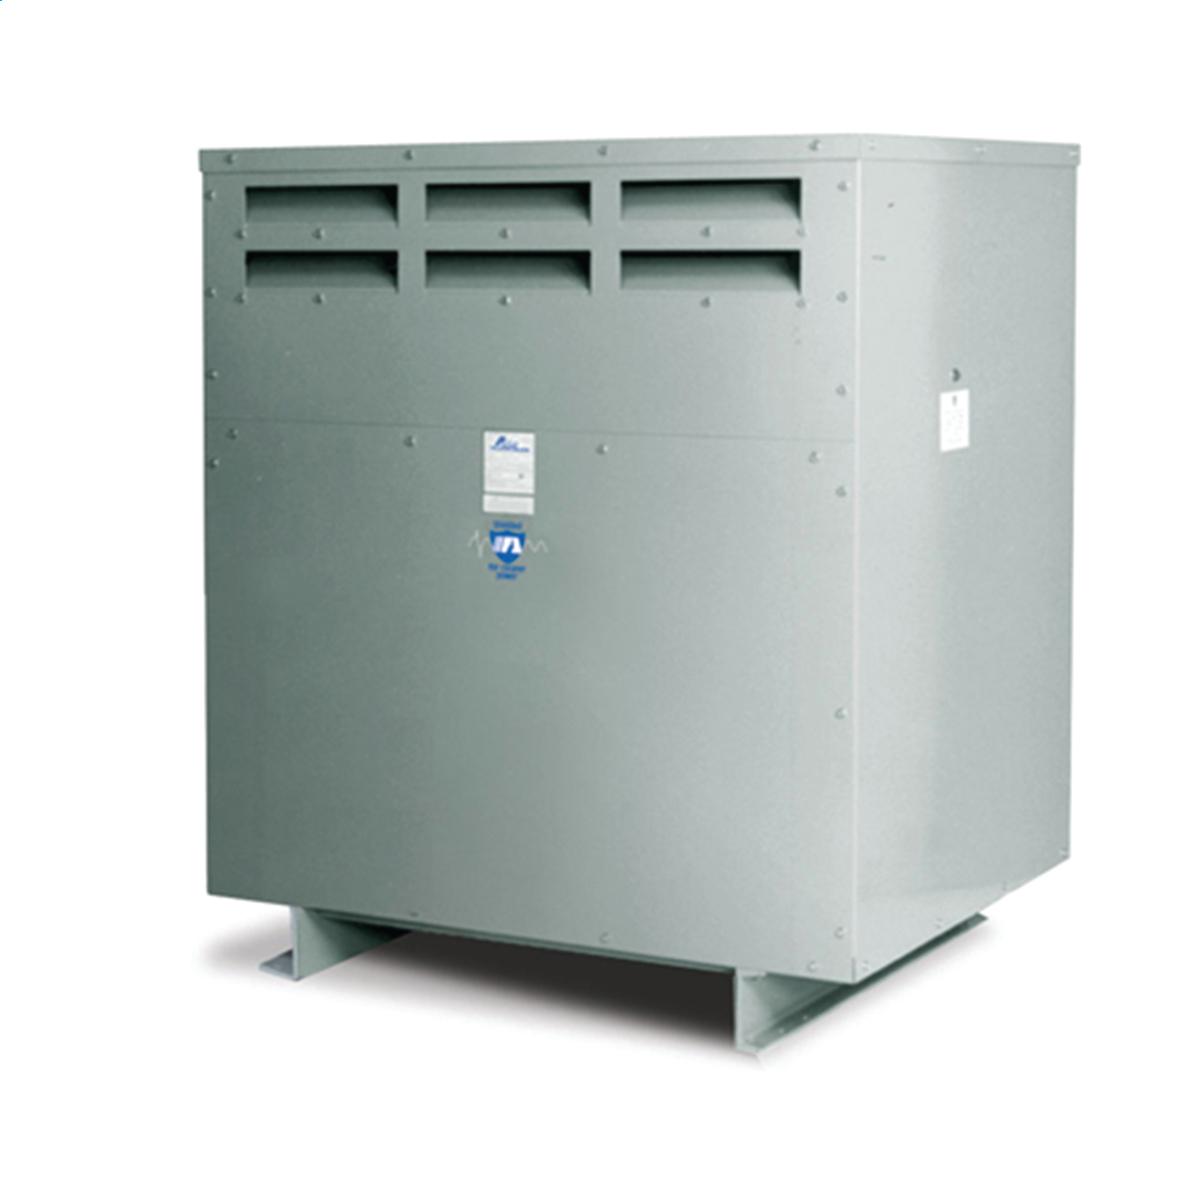 Hubbell WI015M22 Medium Voltage Transformer - Three Phase, 4800Δ - 208Y//120V, 1500kVA  ; Lower operating cost over Liquid-filled ; No additional fireproofing or venting ; Long life expectancy ; Smaller, lighter easy to maintain